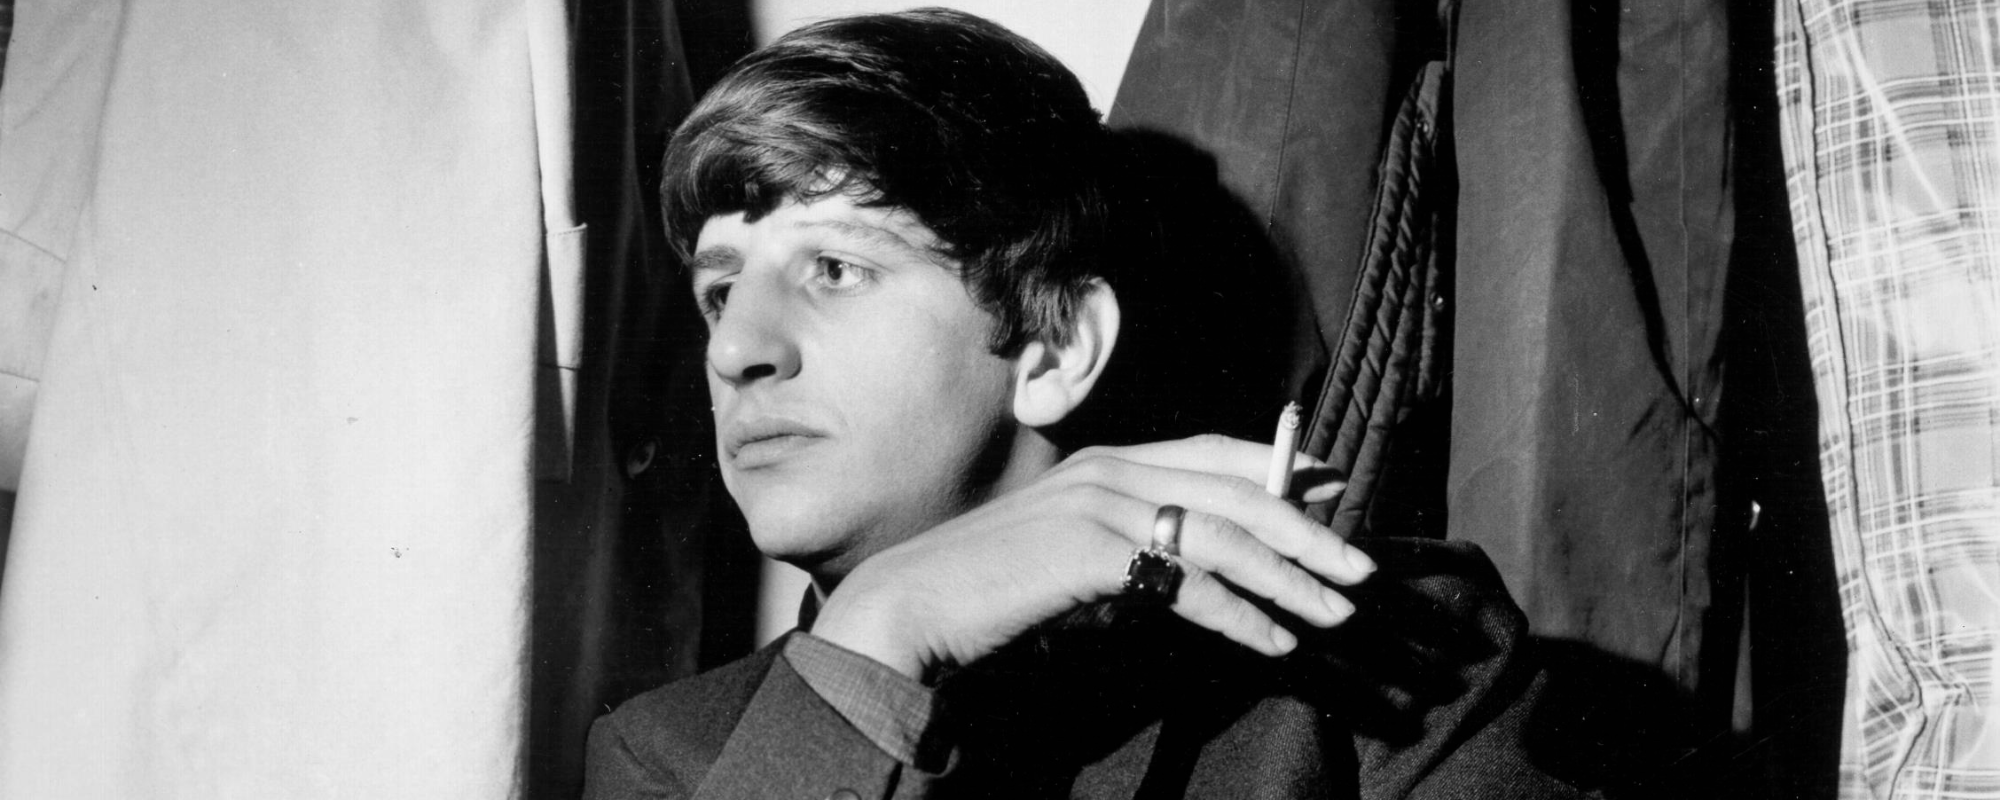 5 Times Ringo Starr Stepped into the Spotlight as The Beatles’ Lead Singer